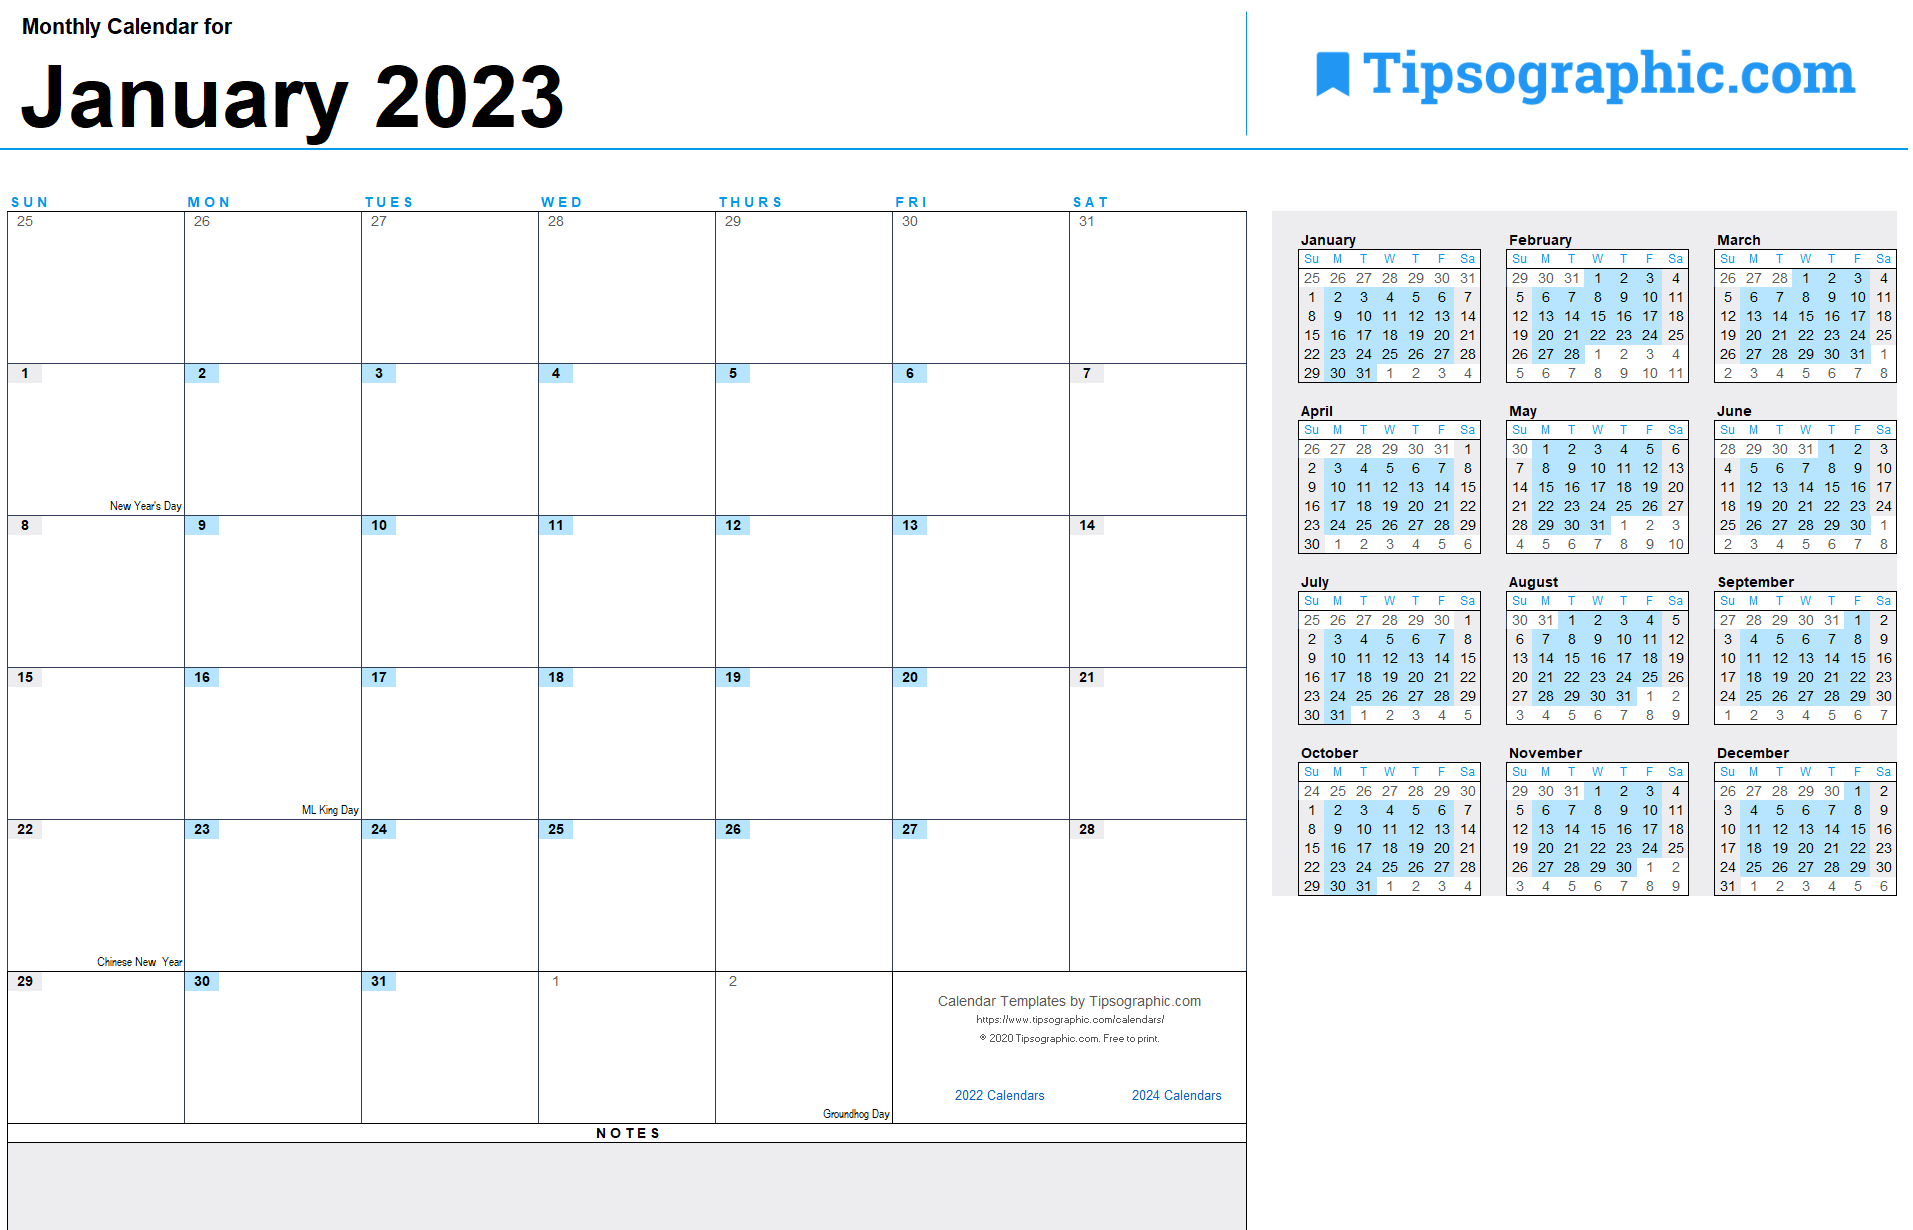 2023 calendar template 85 x 11 inches vertical year at a etsy - 2023 ...